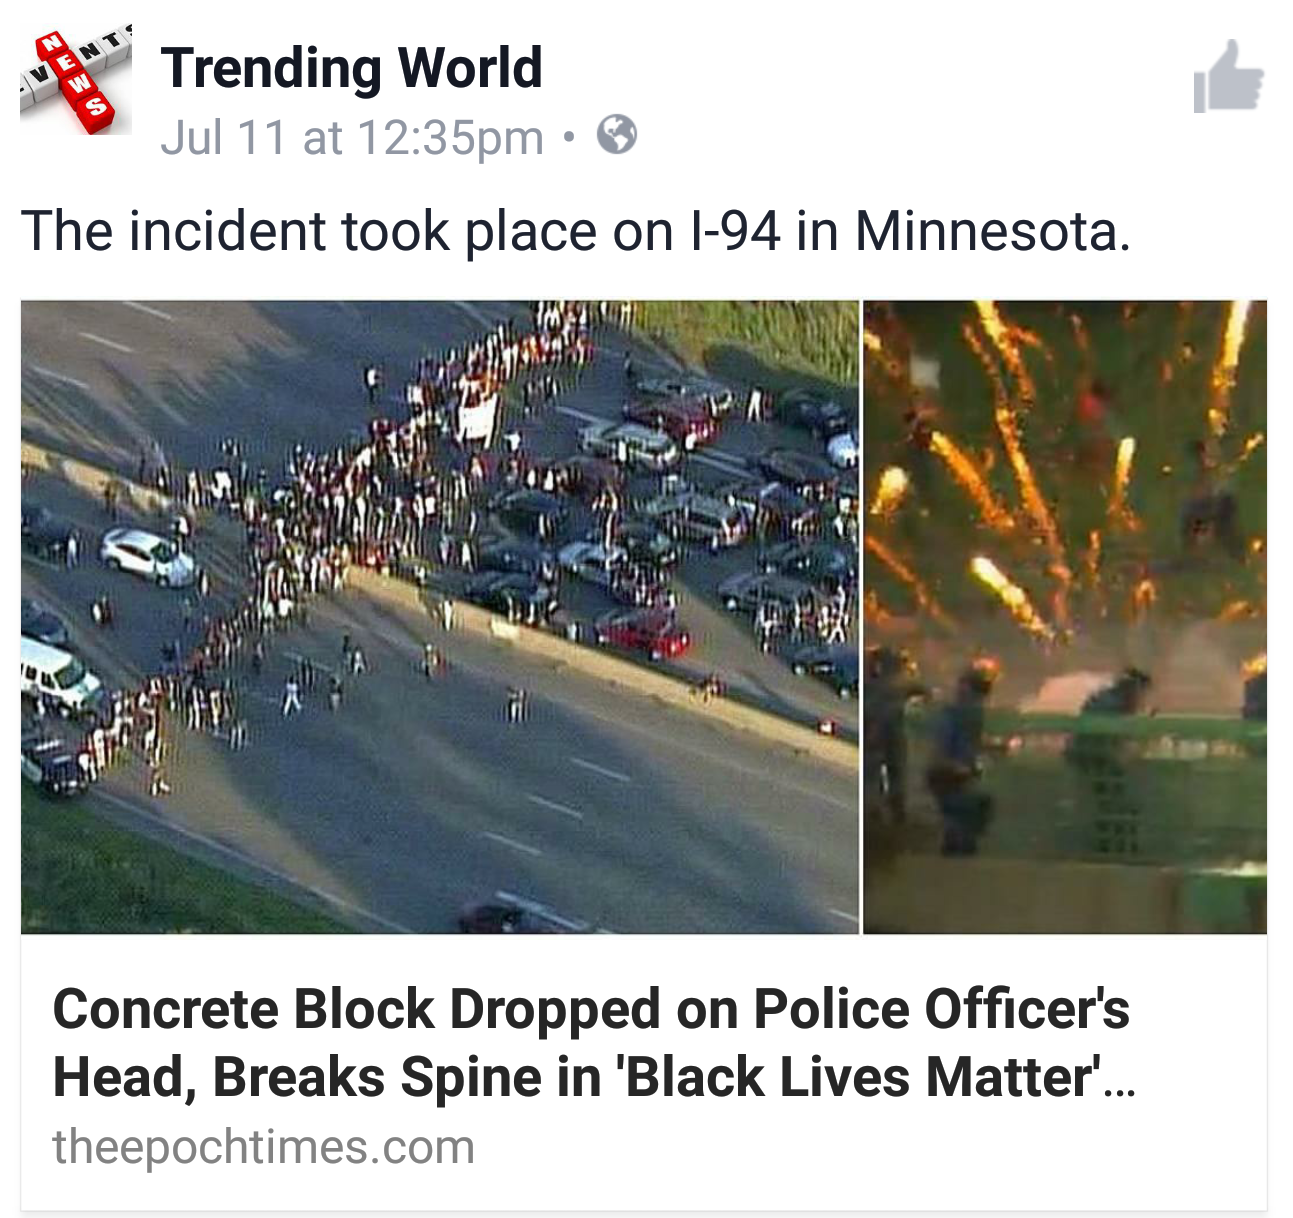 Violent protests are what the bias media likes to etch into our brains.